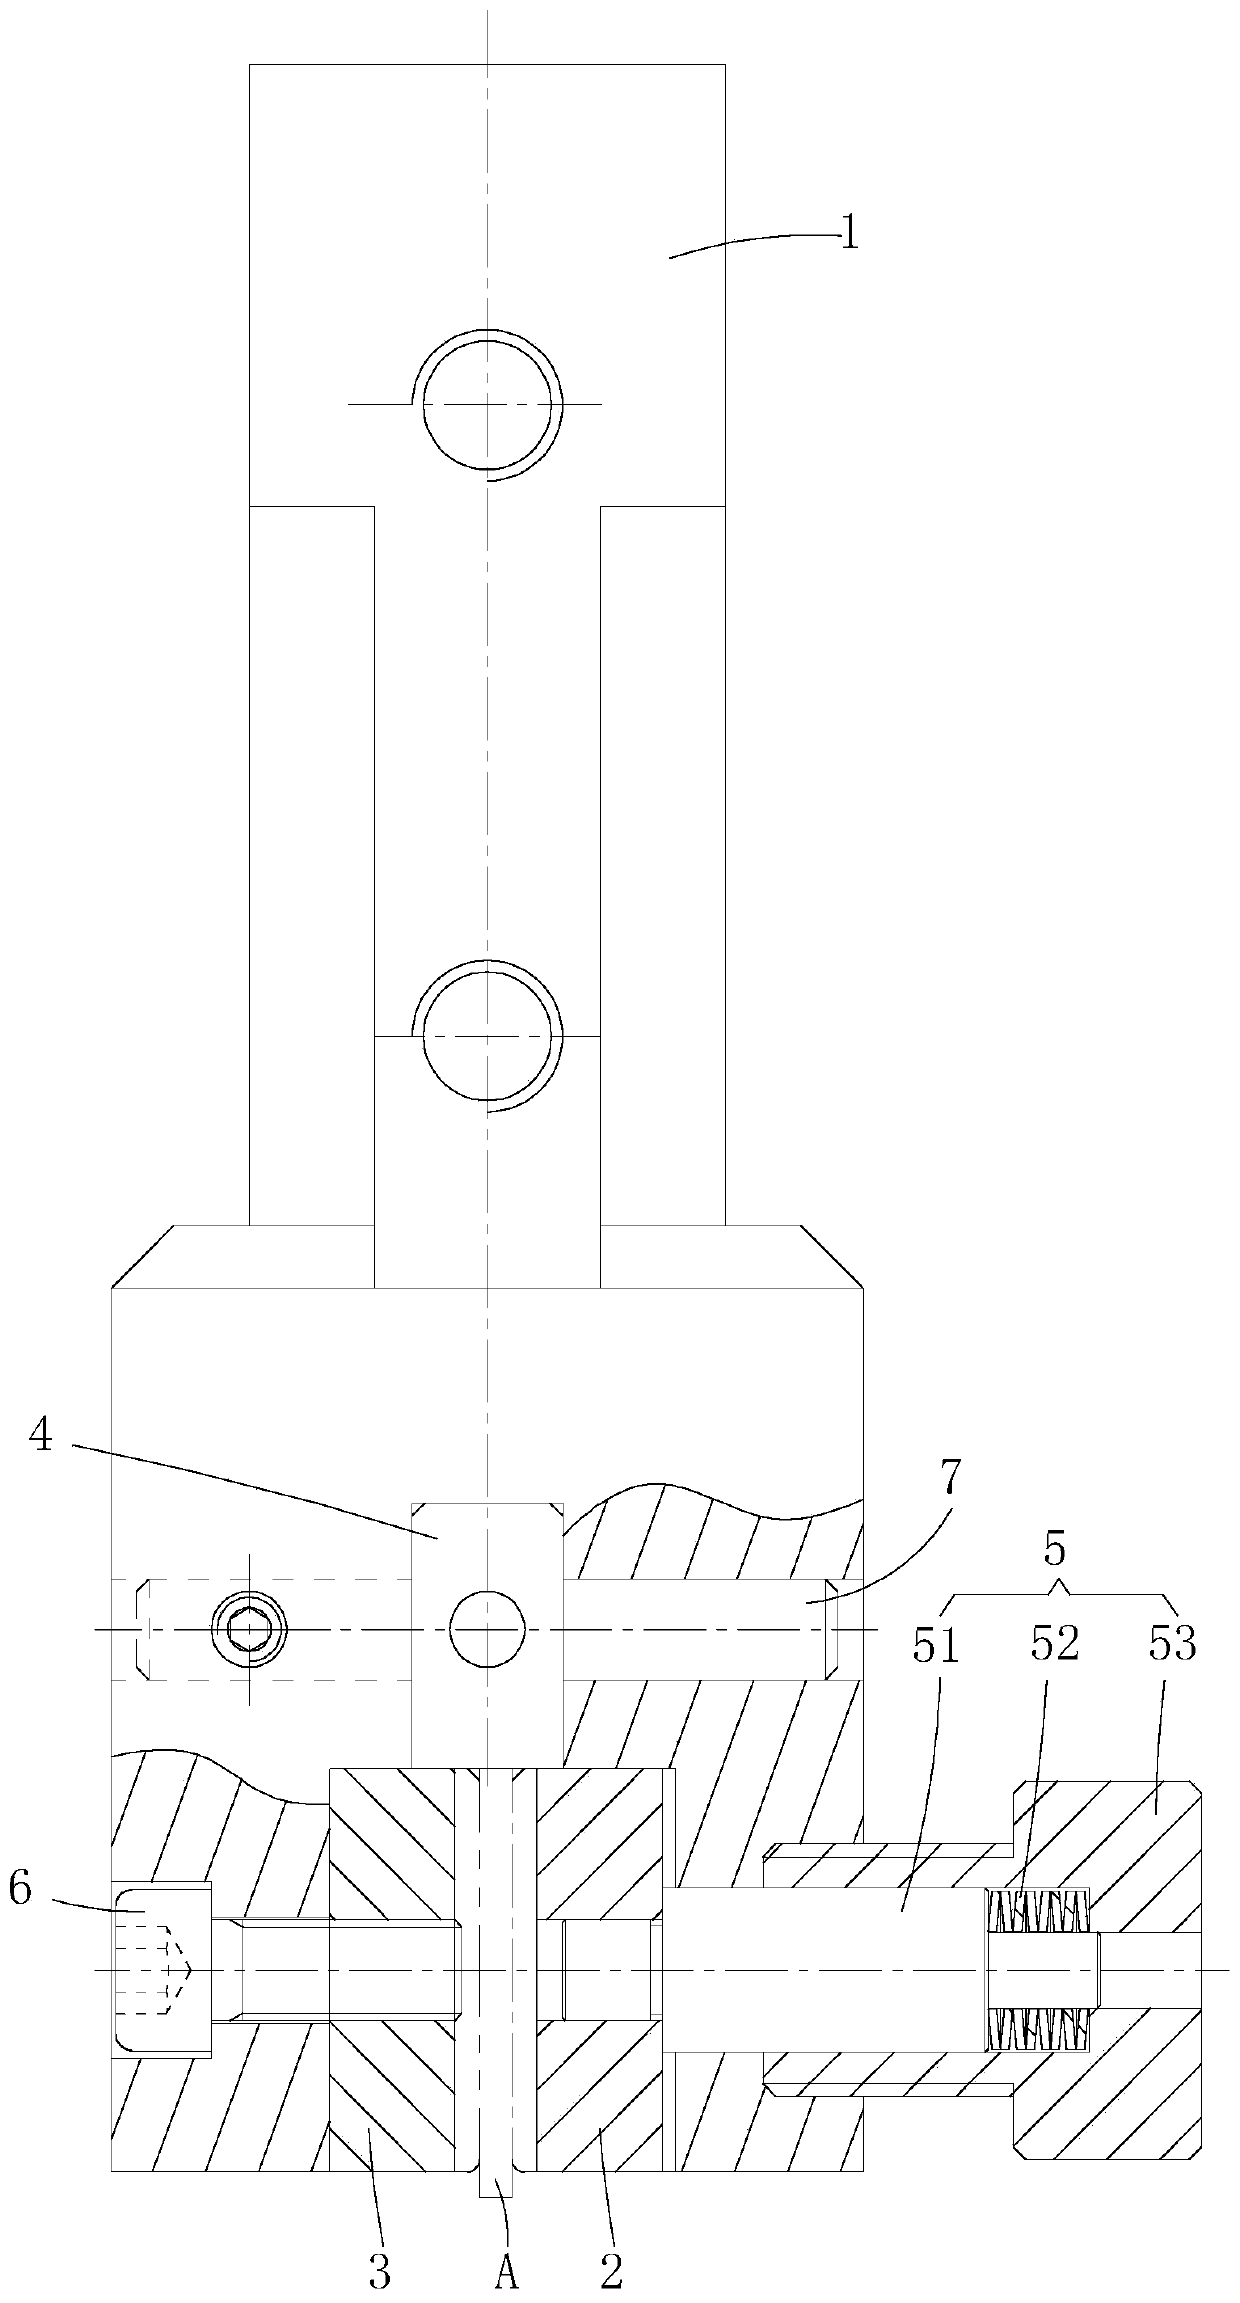 Band saw blade guide device for measuring sawing force and band sawing machine